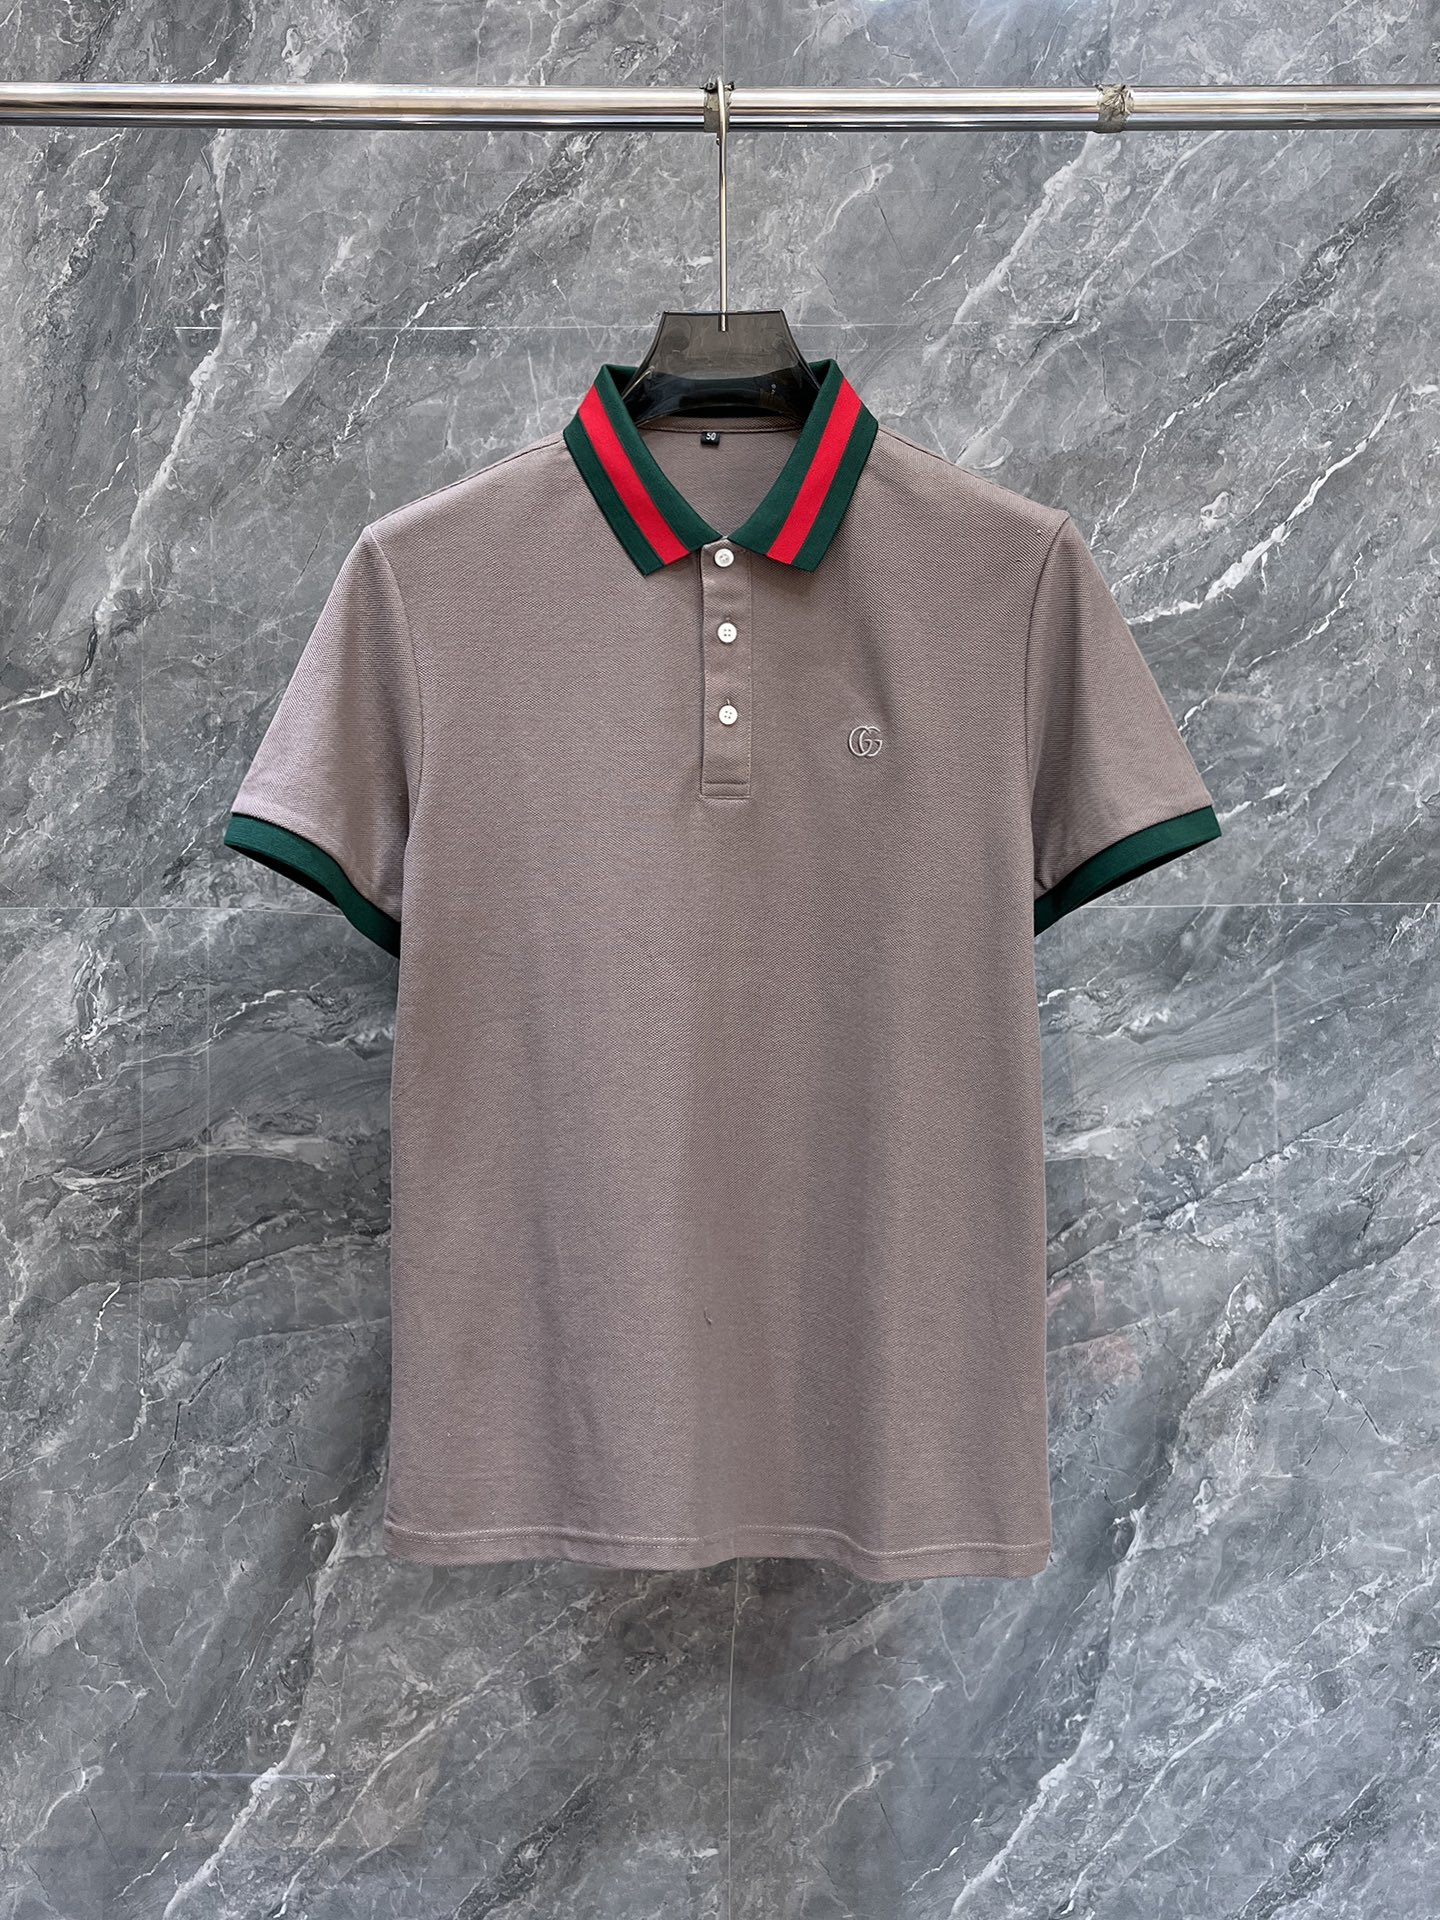 Gucci New
 Clothing Polo Men Cotton Summer Collection Fashion